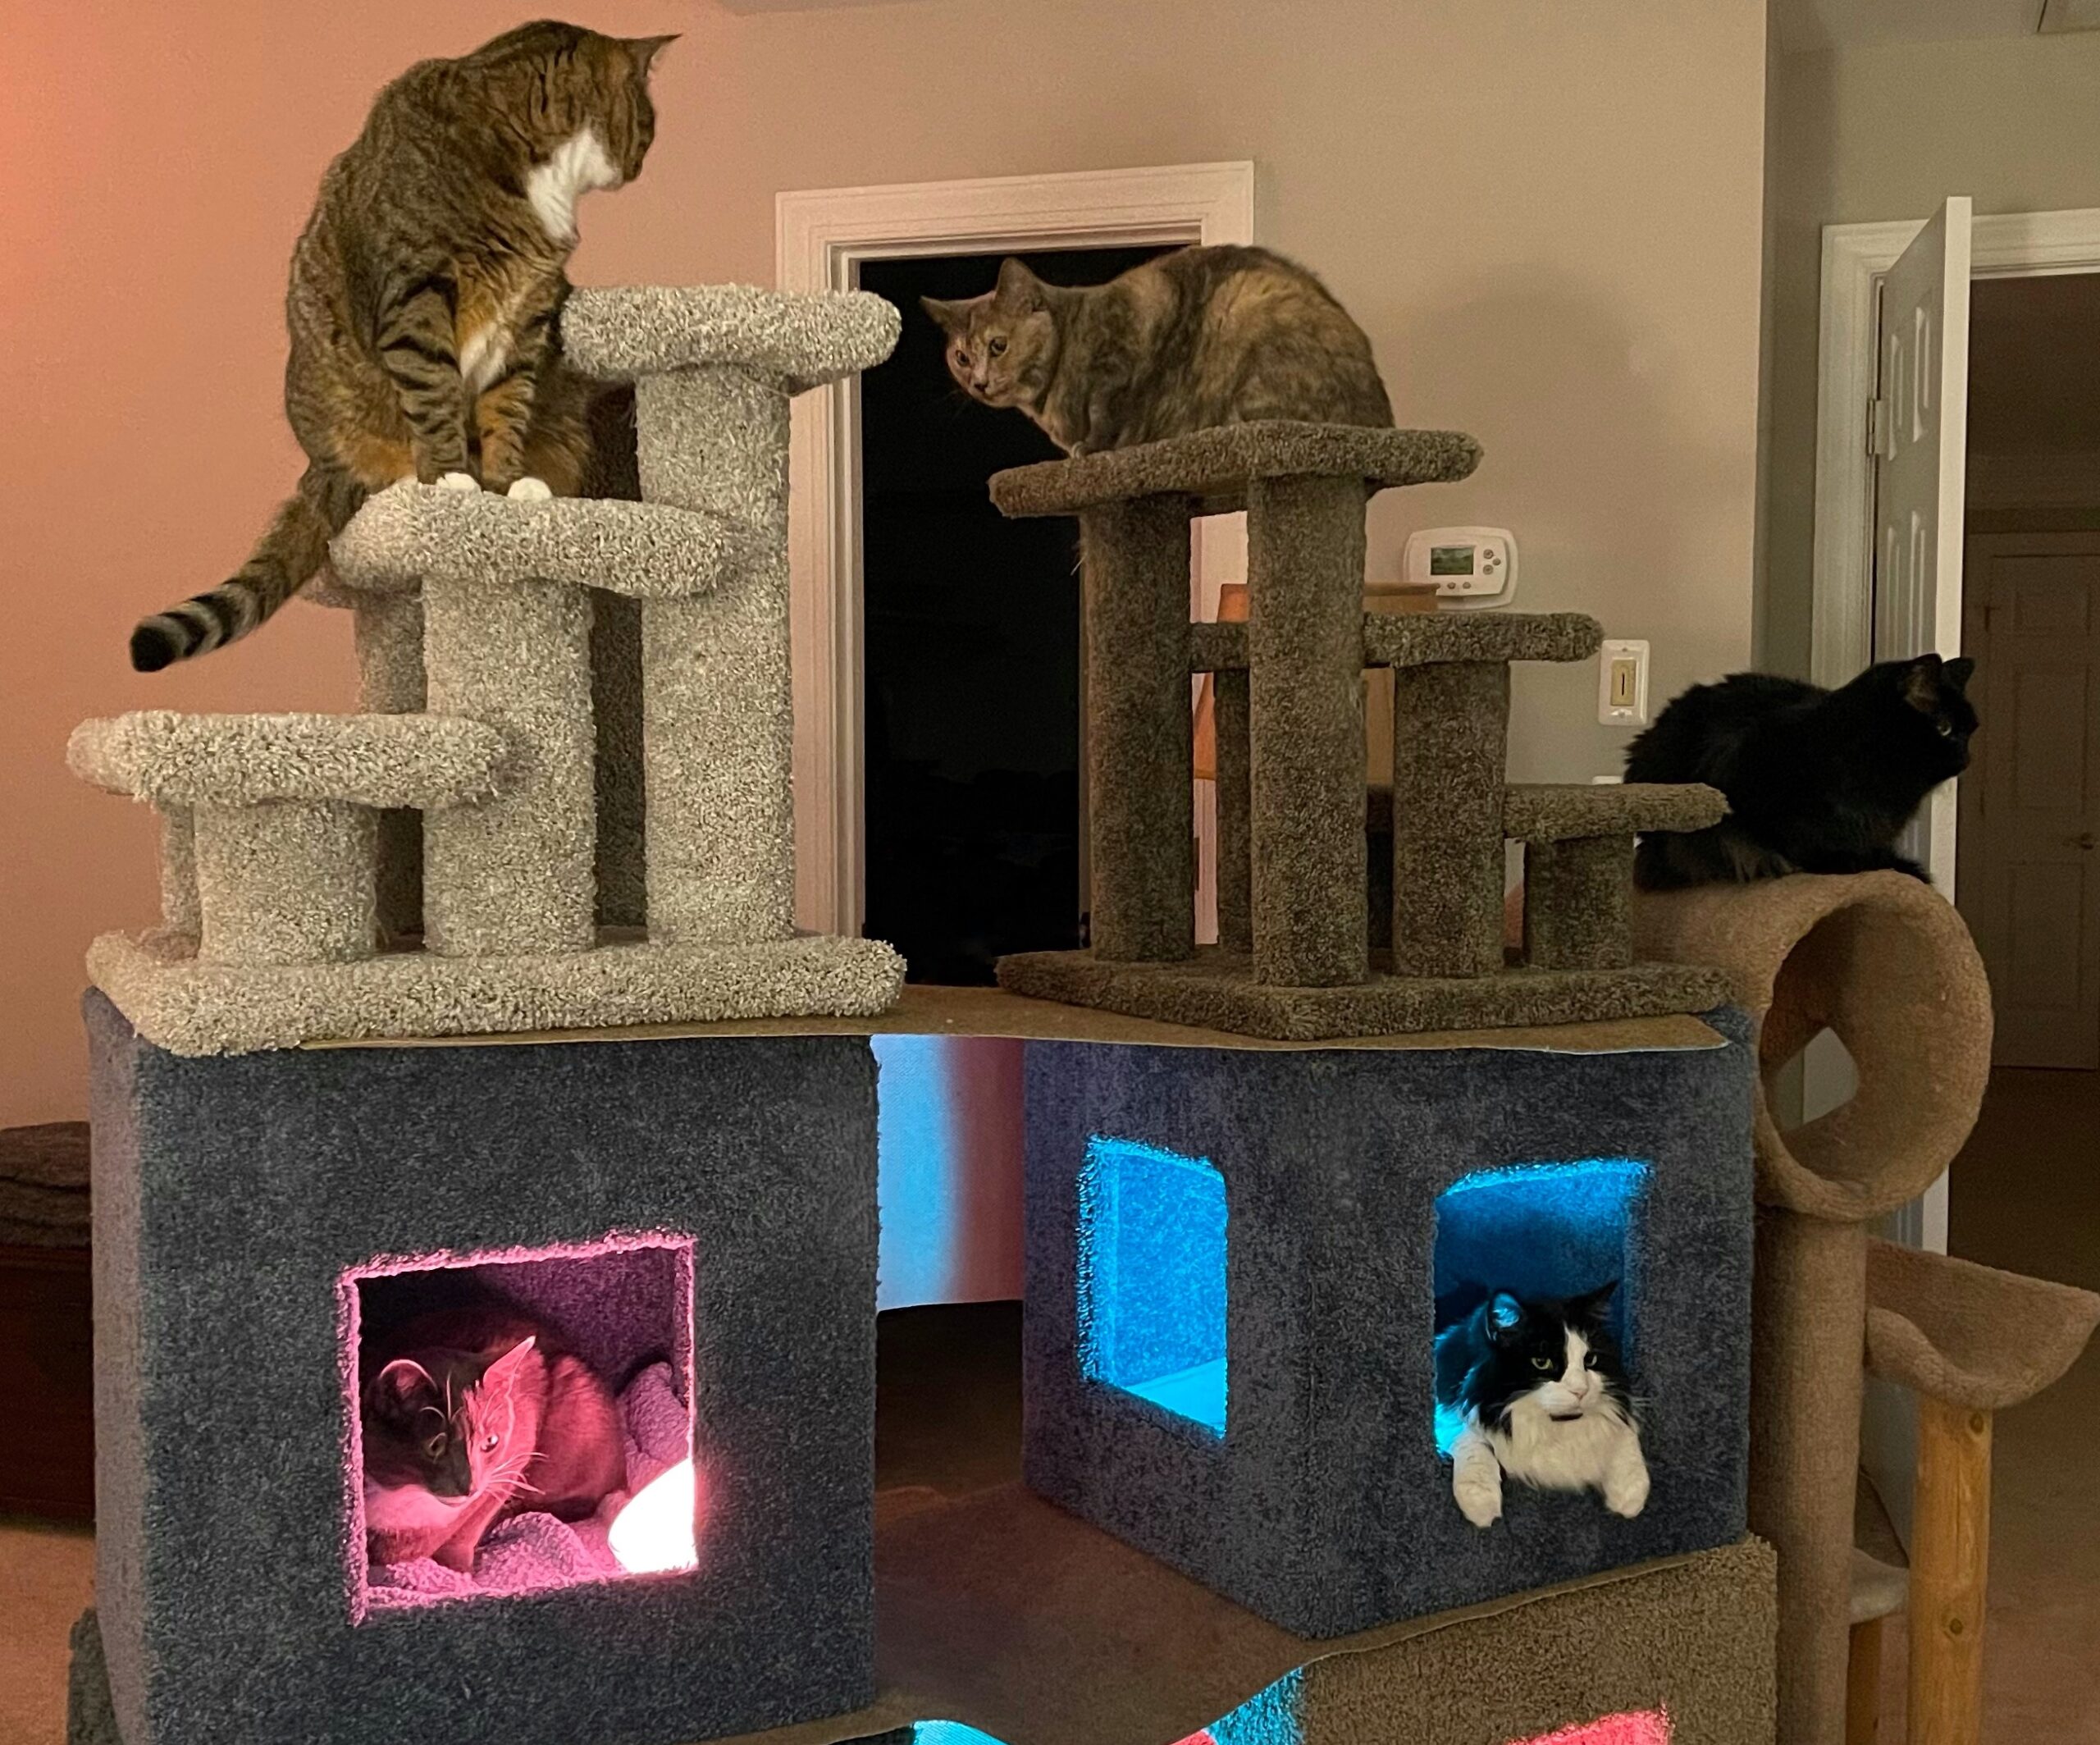 https://www.askamanager.org/wp-content/uploads/2021/01/cat-city-scaled.jpeg